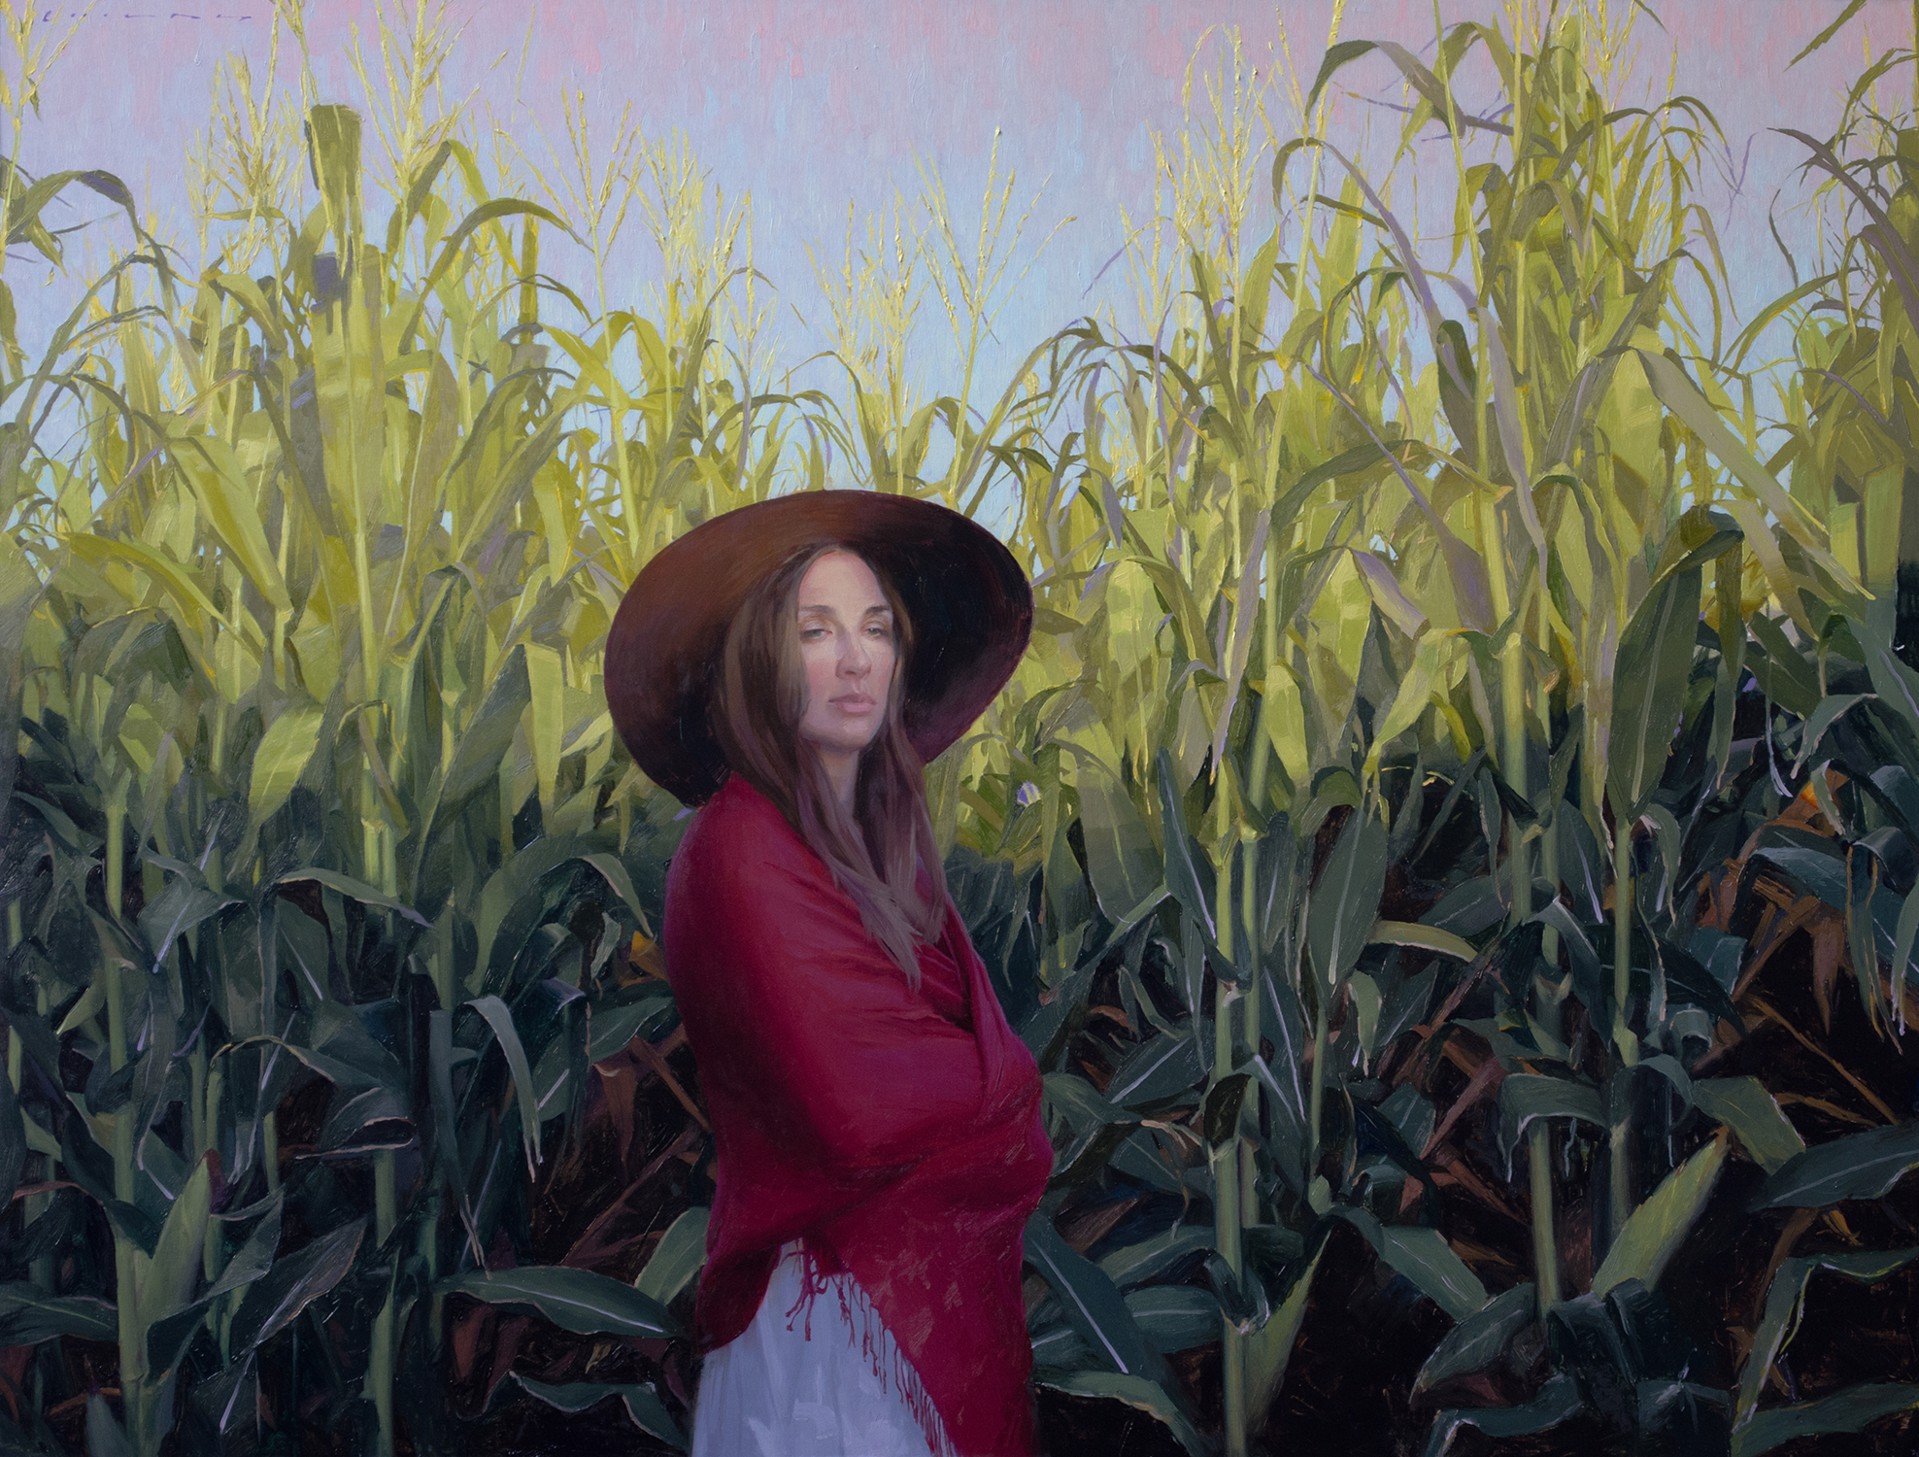 Twilight Harvest by Casey Childs